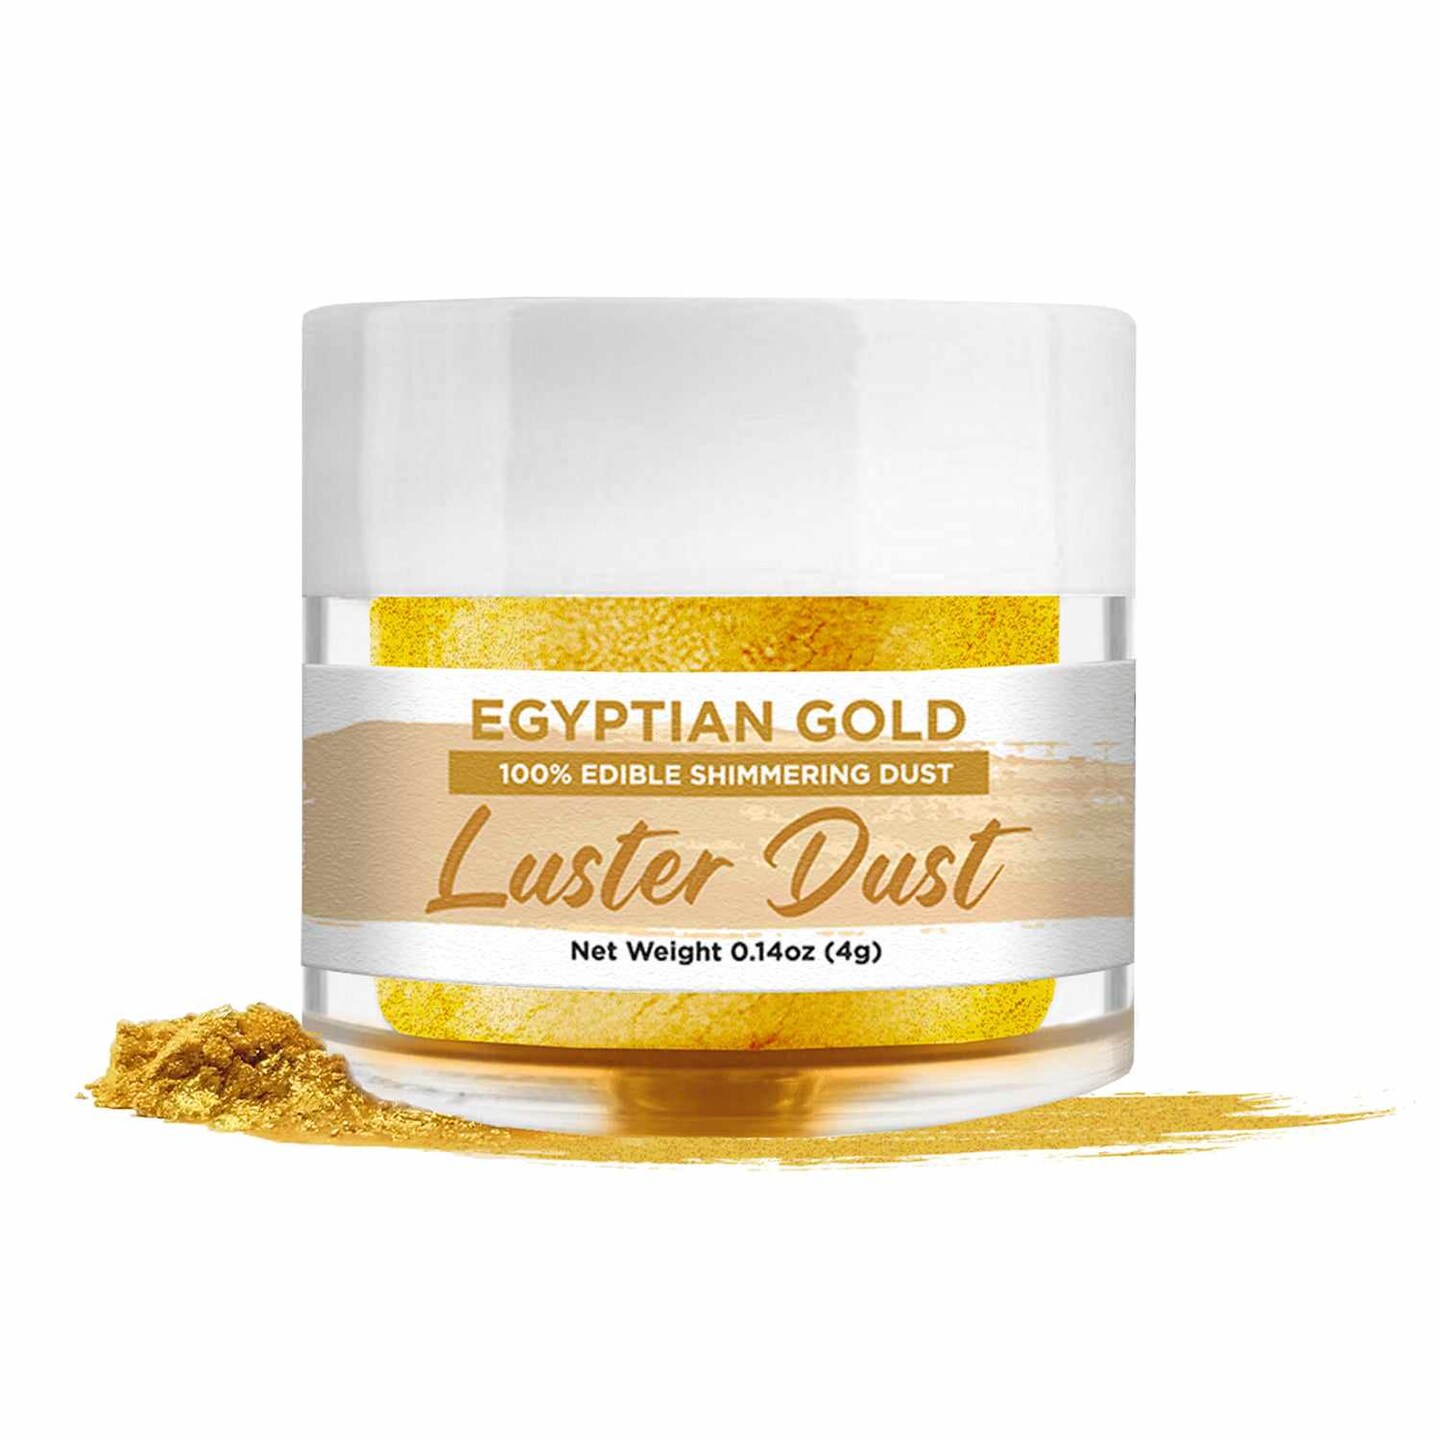 Divine Specialties Gold Shimmer Luster Dust (Edible) - 2oz